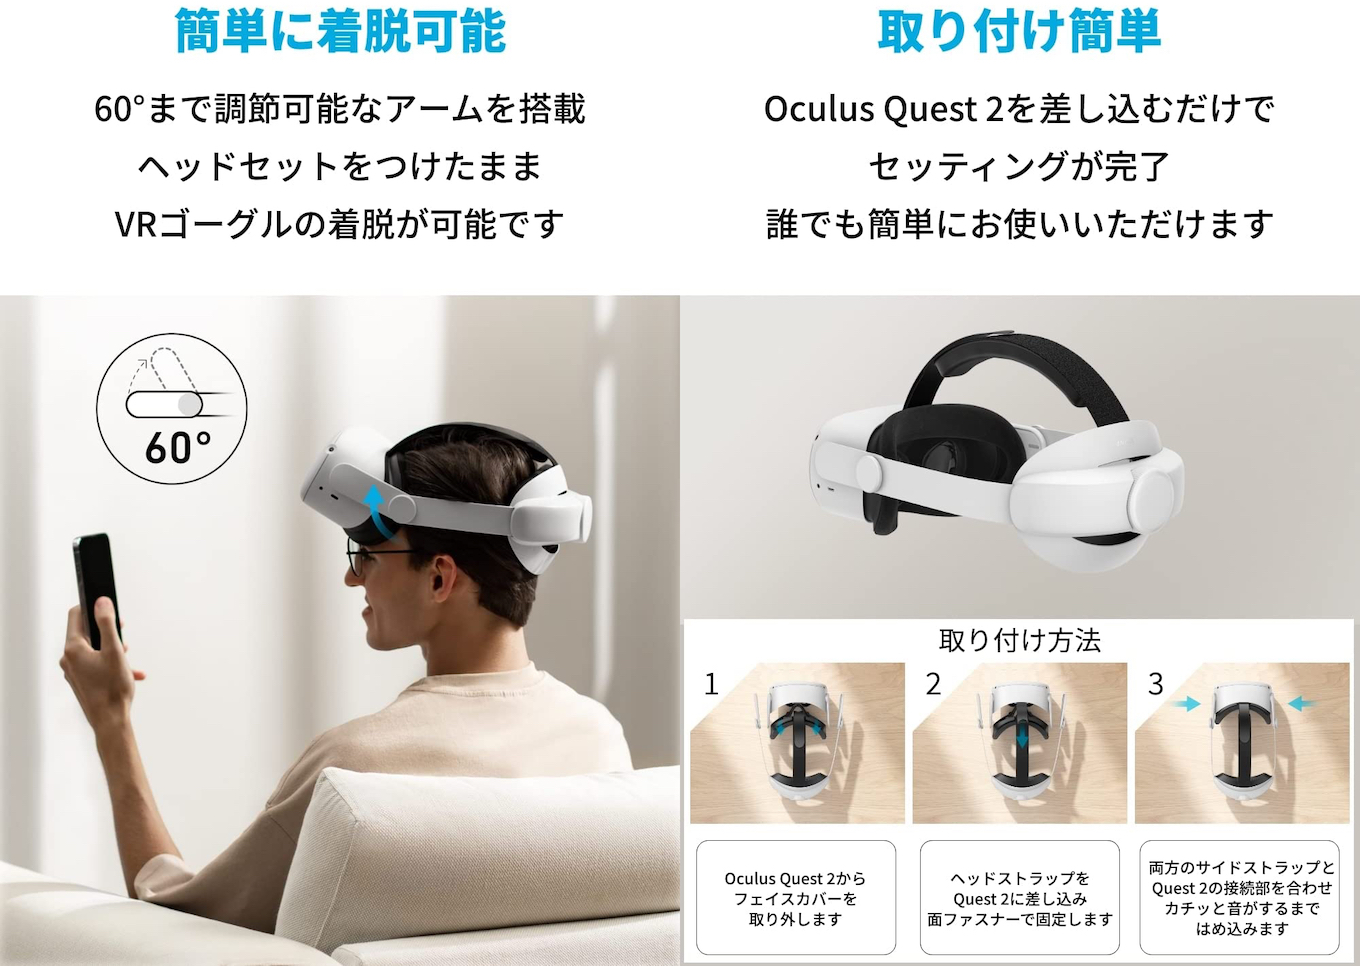 Anker Head Strap for Oculus Quest 2の機能